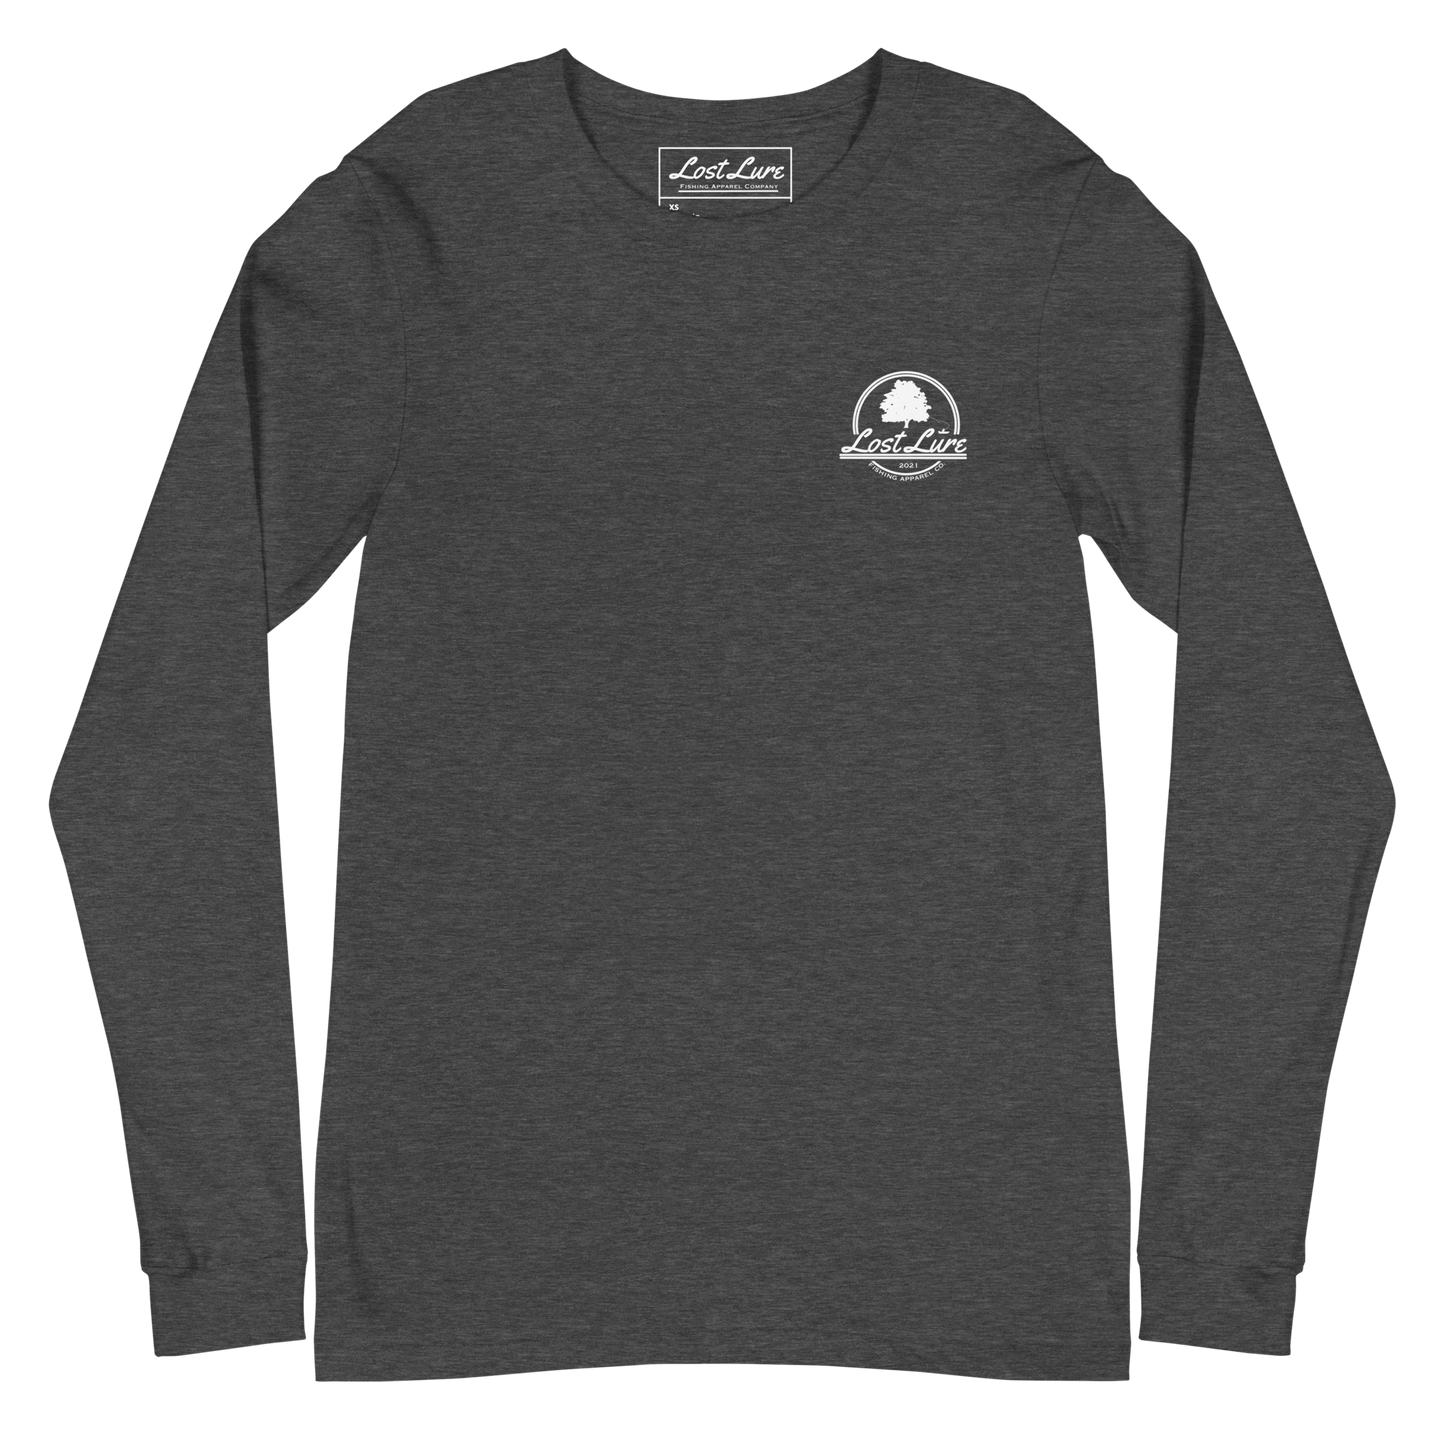 Fly fishing Lost lure long sleeve shirt. It has a design on the back of the shirt black and white outline a fly fisherman and the Rocky Mountains. Grey fishing shirt, front side